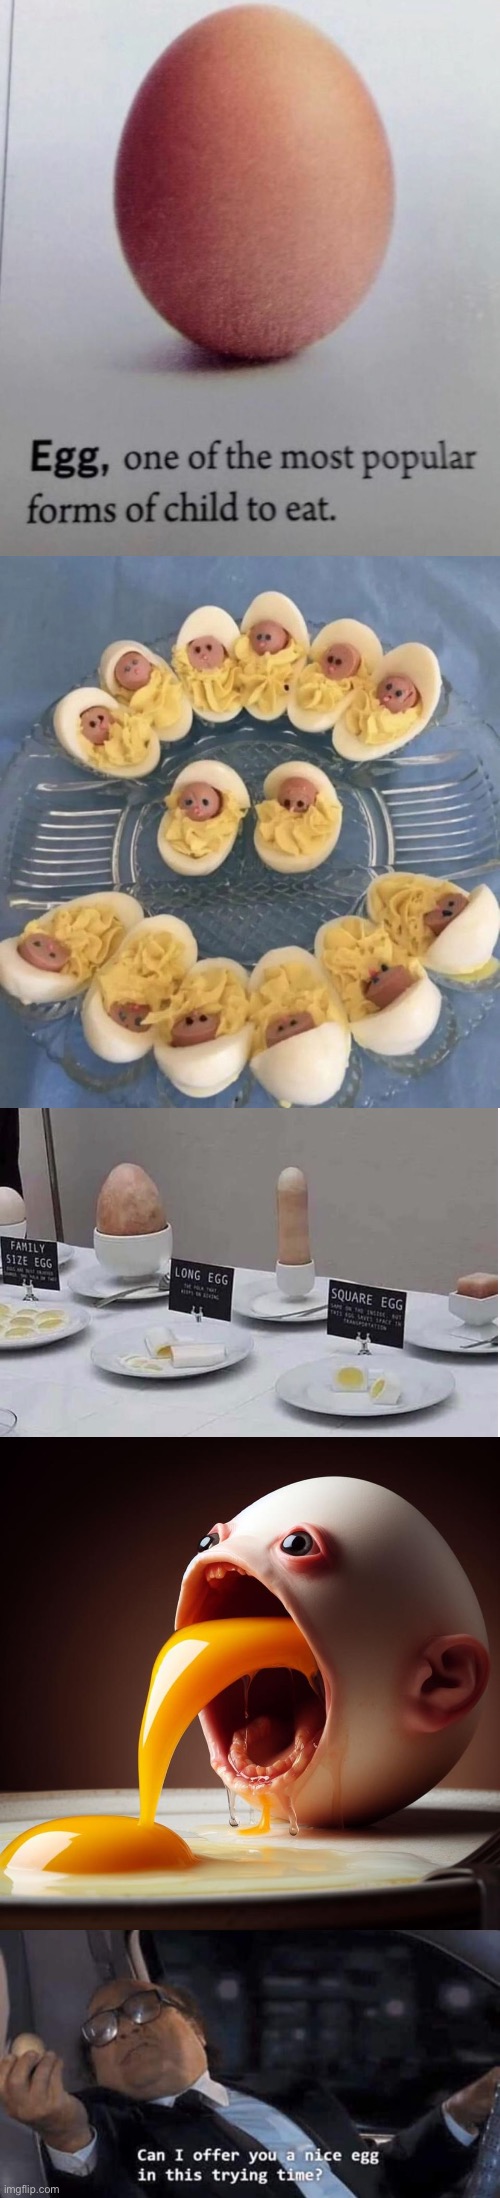 Egg | image tagged in can i offer you a nice egg in this trying time,eggs,egg,eggman,eggs-dee,eggbert | made w/ Imgflip meme maker